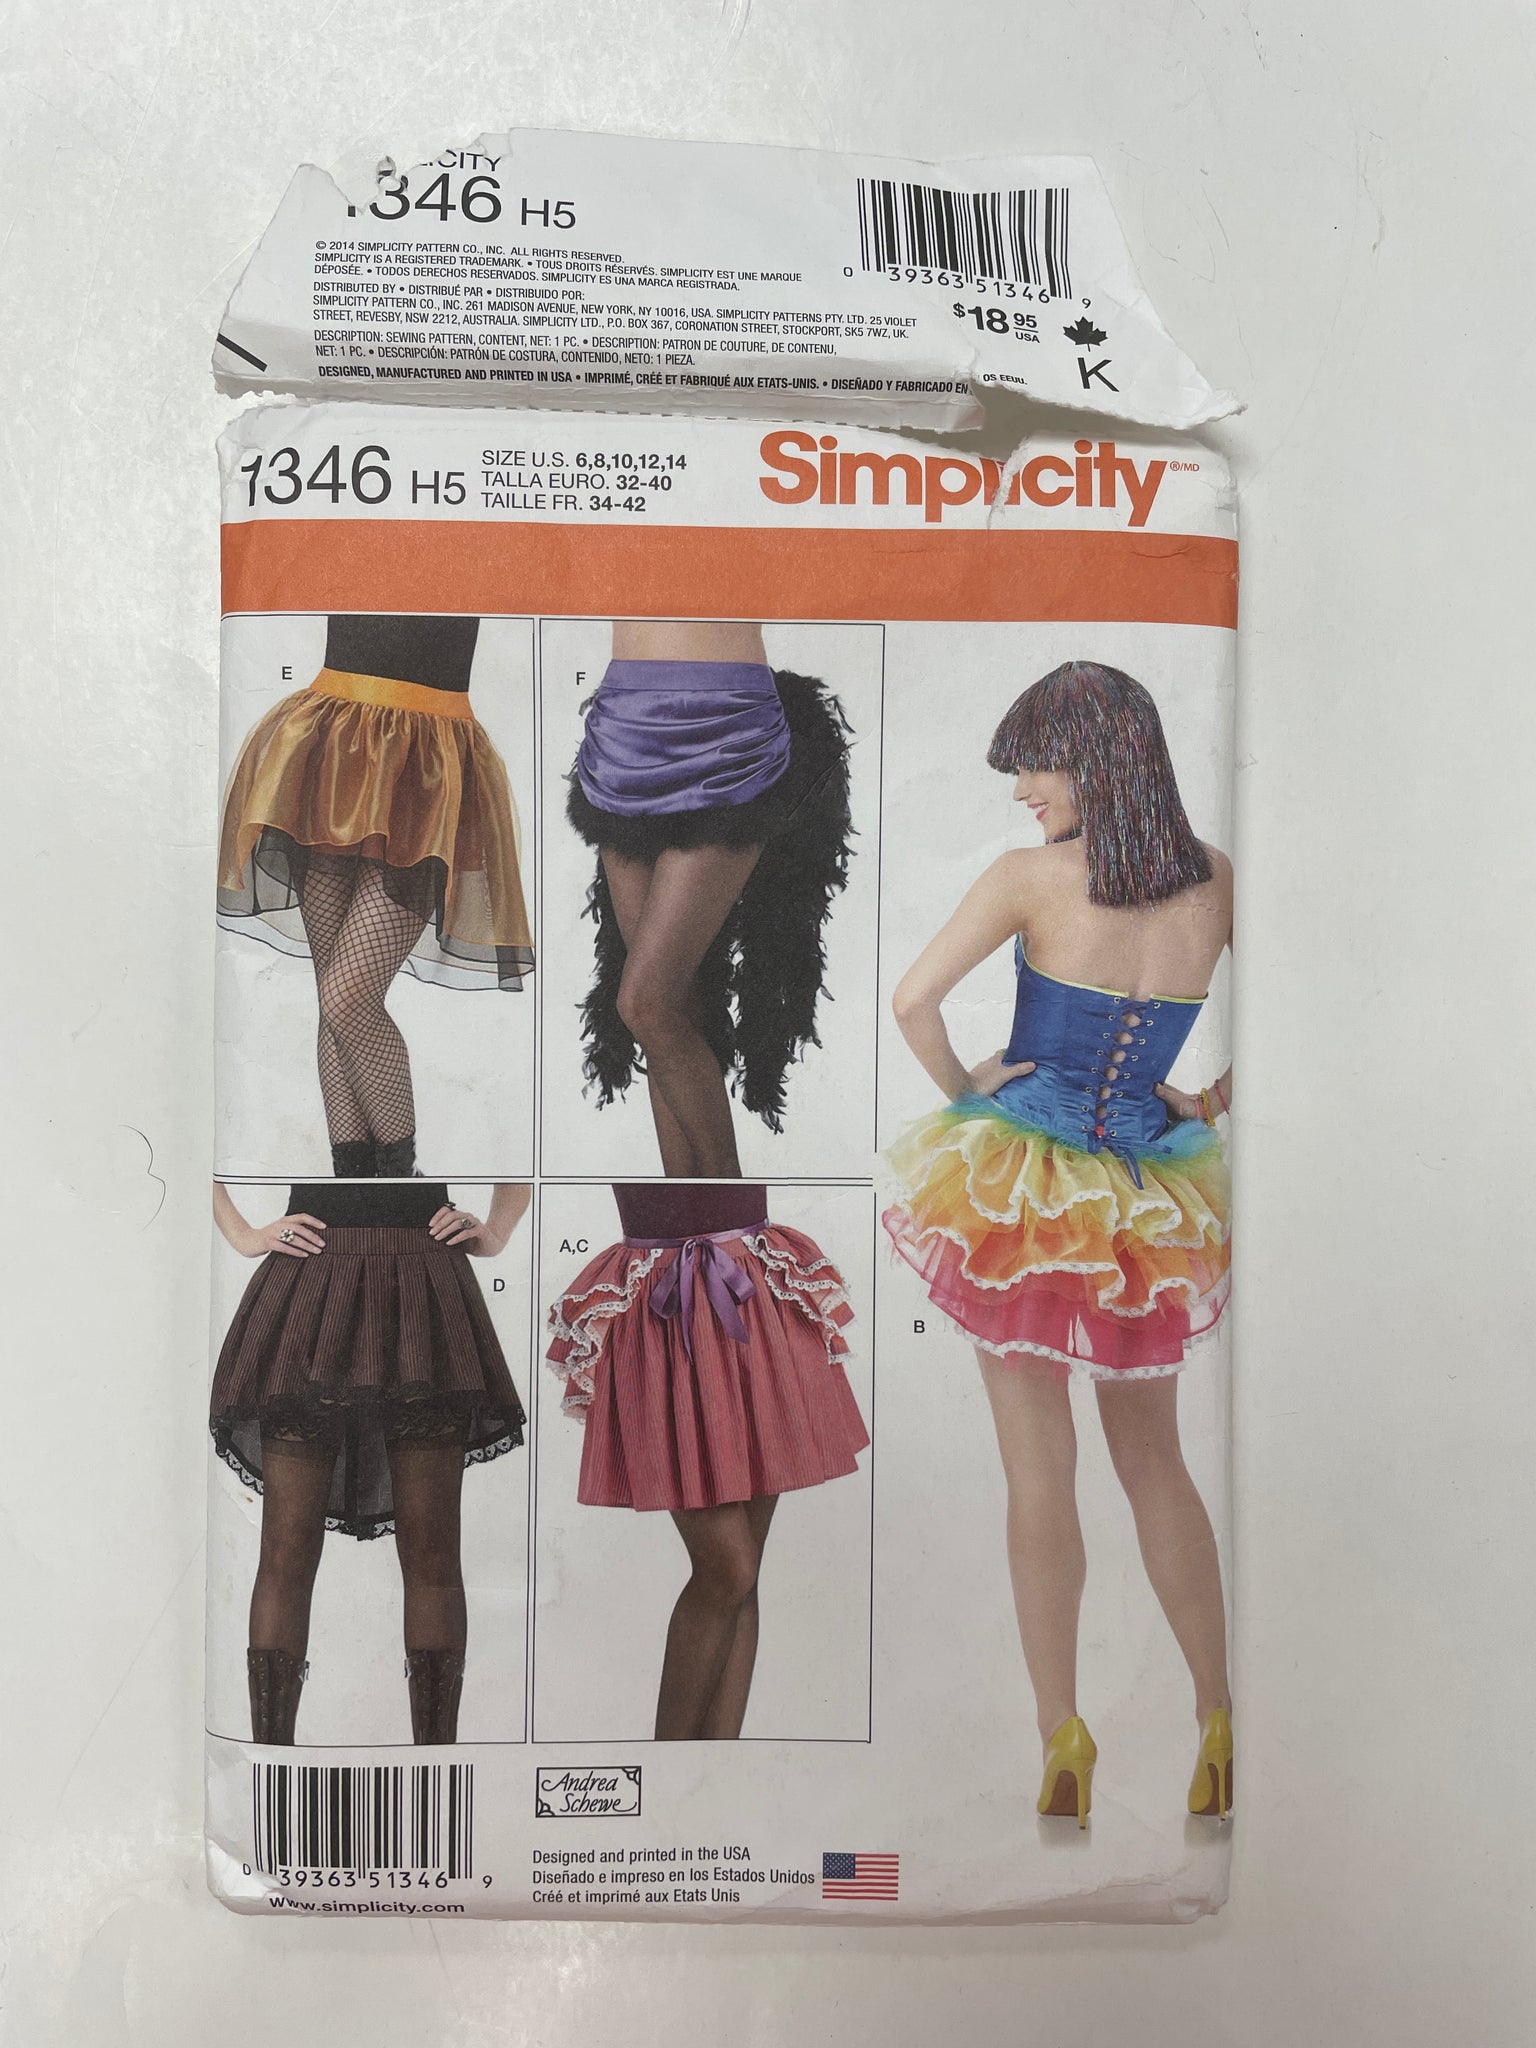 2014 Simplicity 1346 Sewing Pattern - Costume Skirts